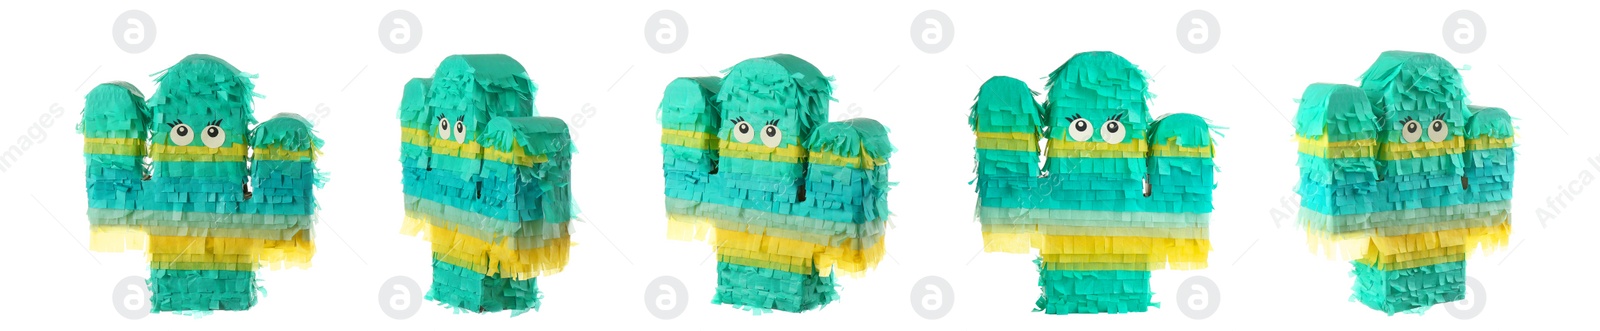 Image of Set with funny cactus shaped pinatas on white background. Banner design